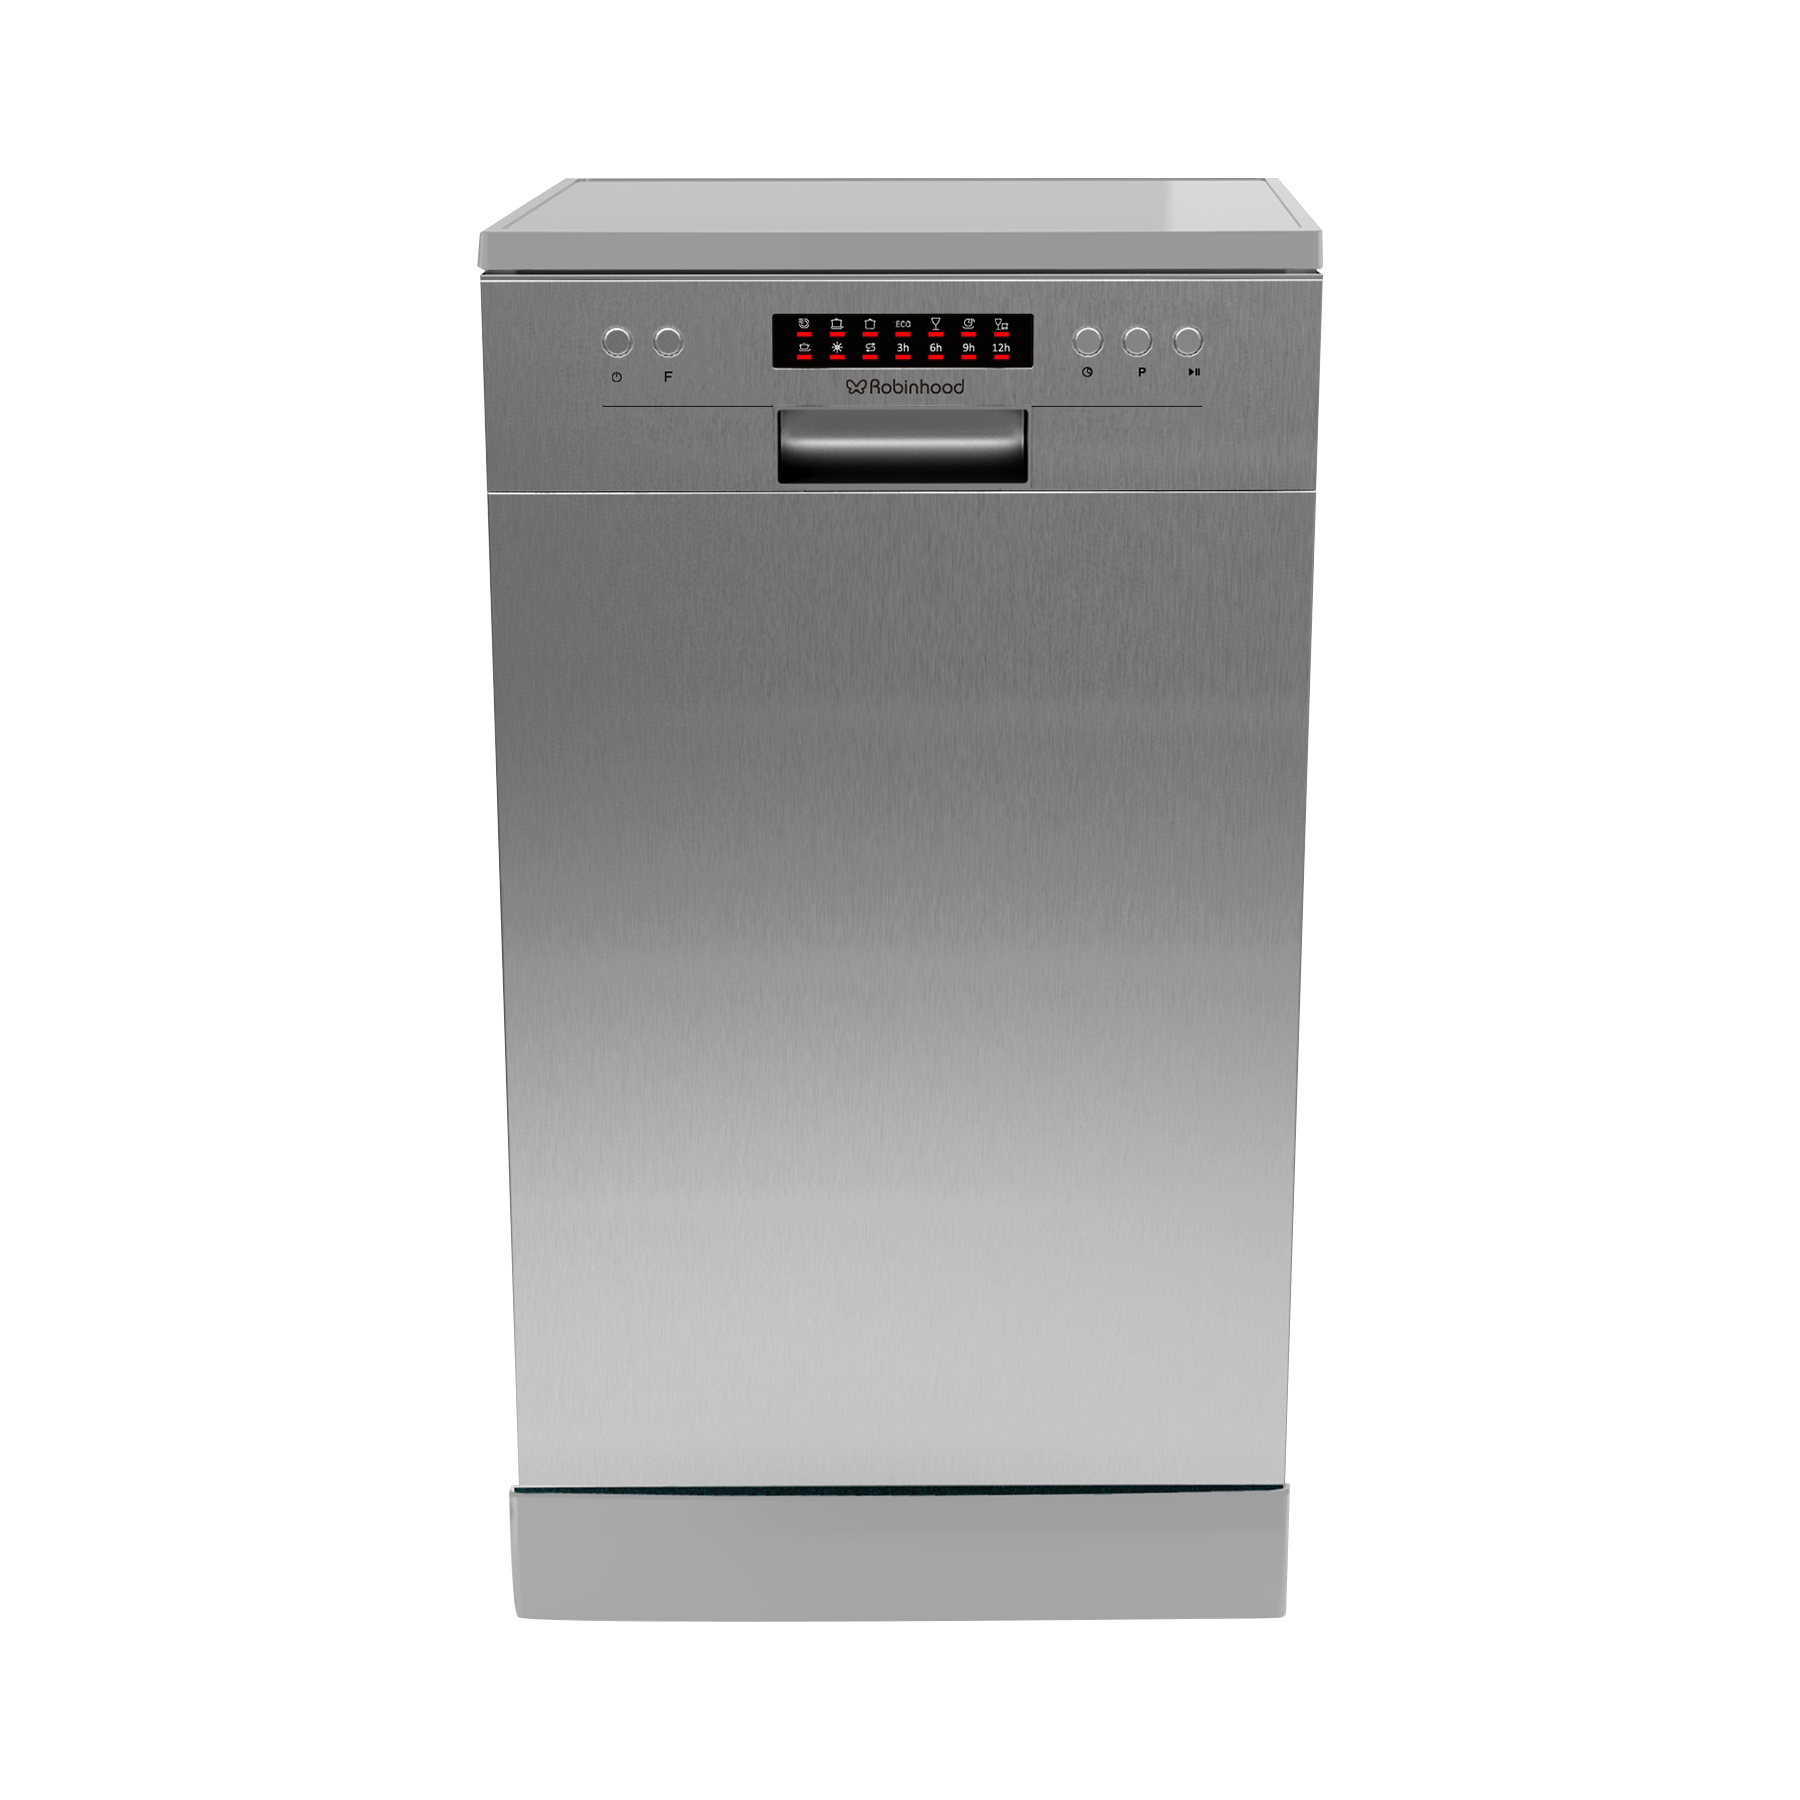 45CM Freestanding Dishwasher Painted Silver